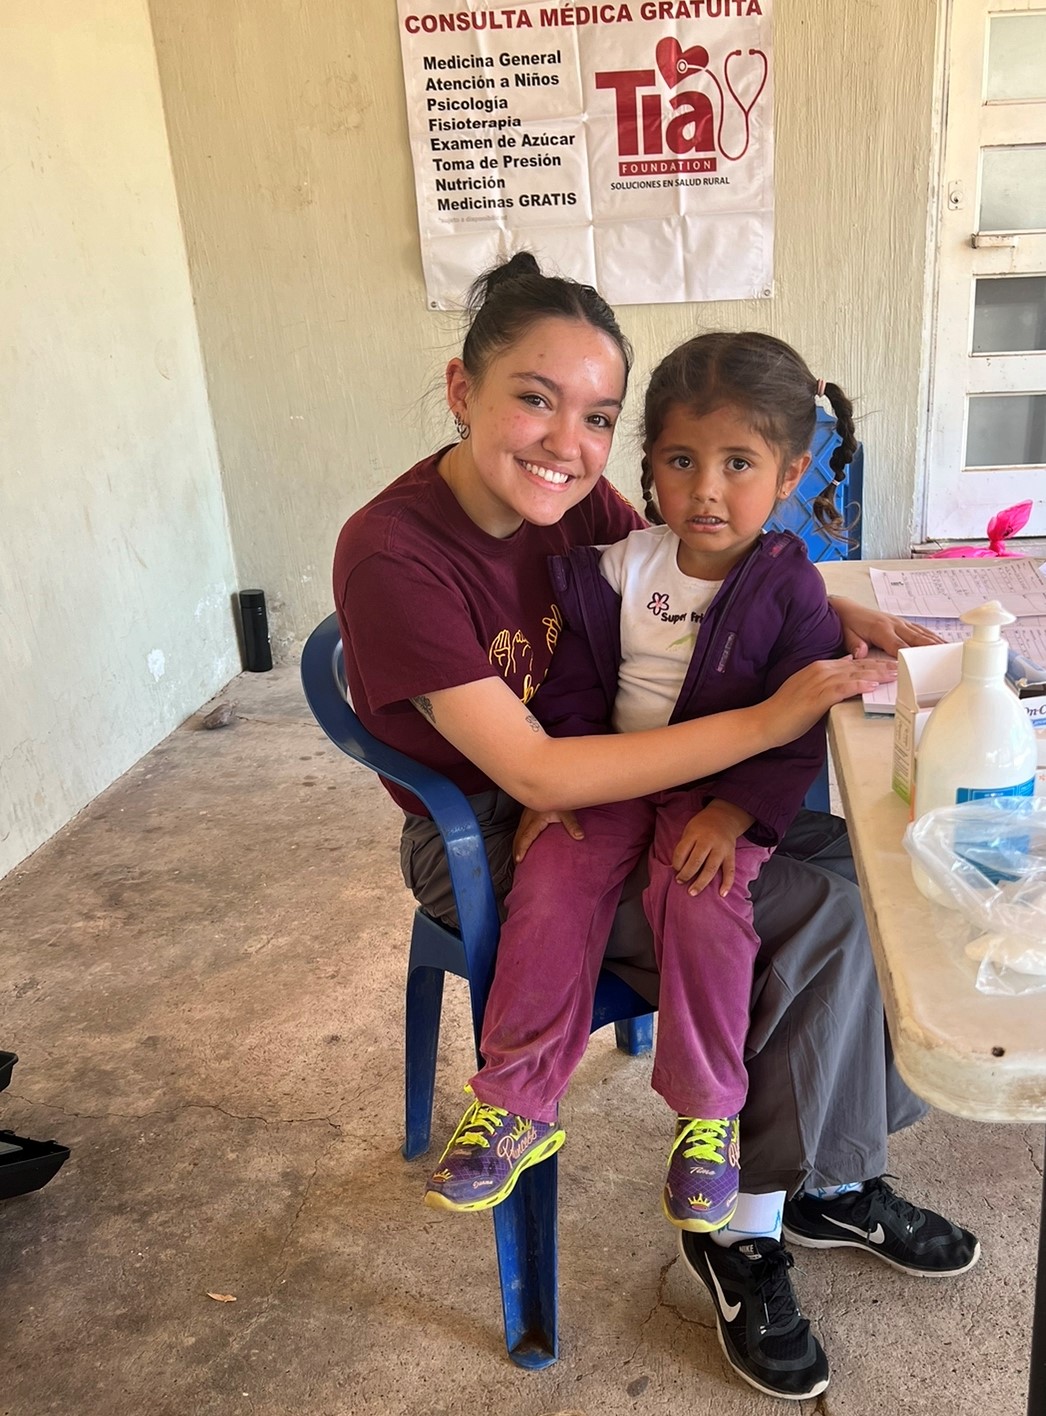 Esperanza Biggs smiles at the camera with a little girl on her lap at a community health center in Mexico